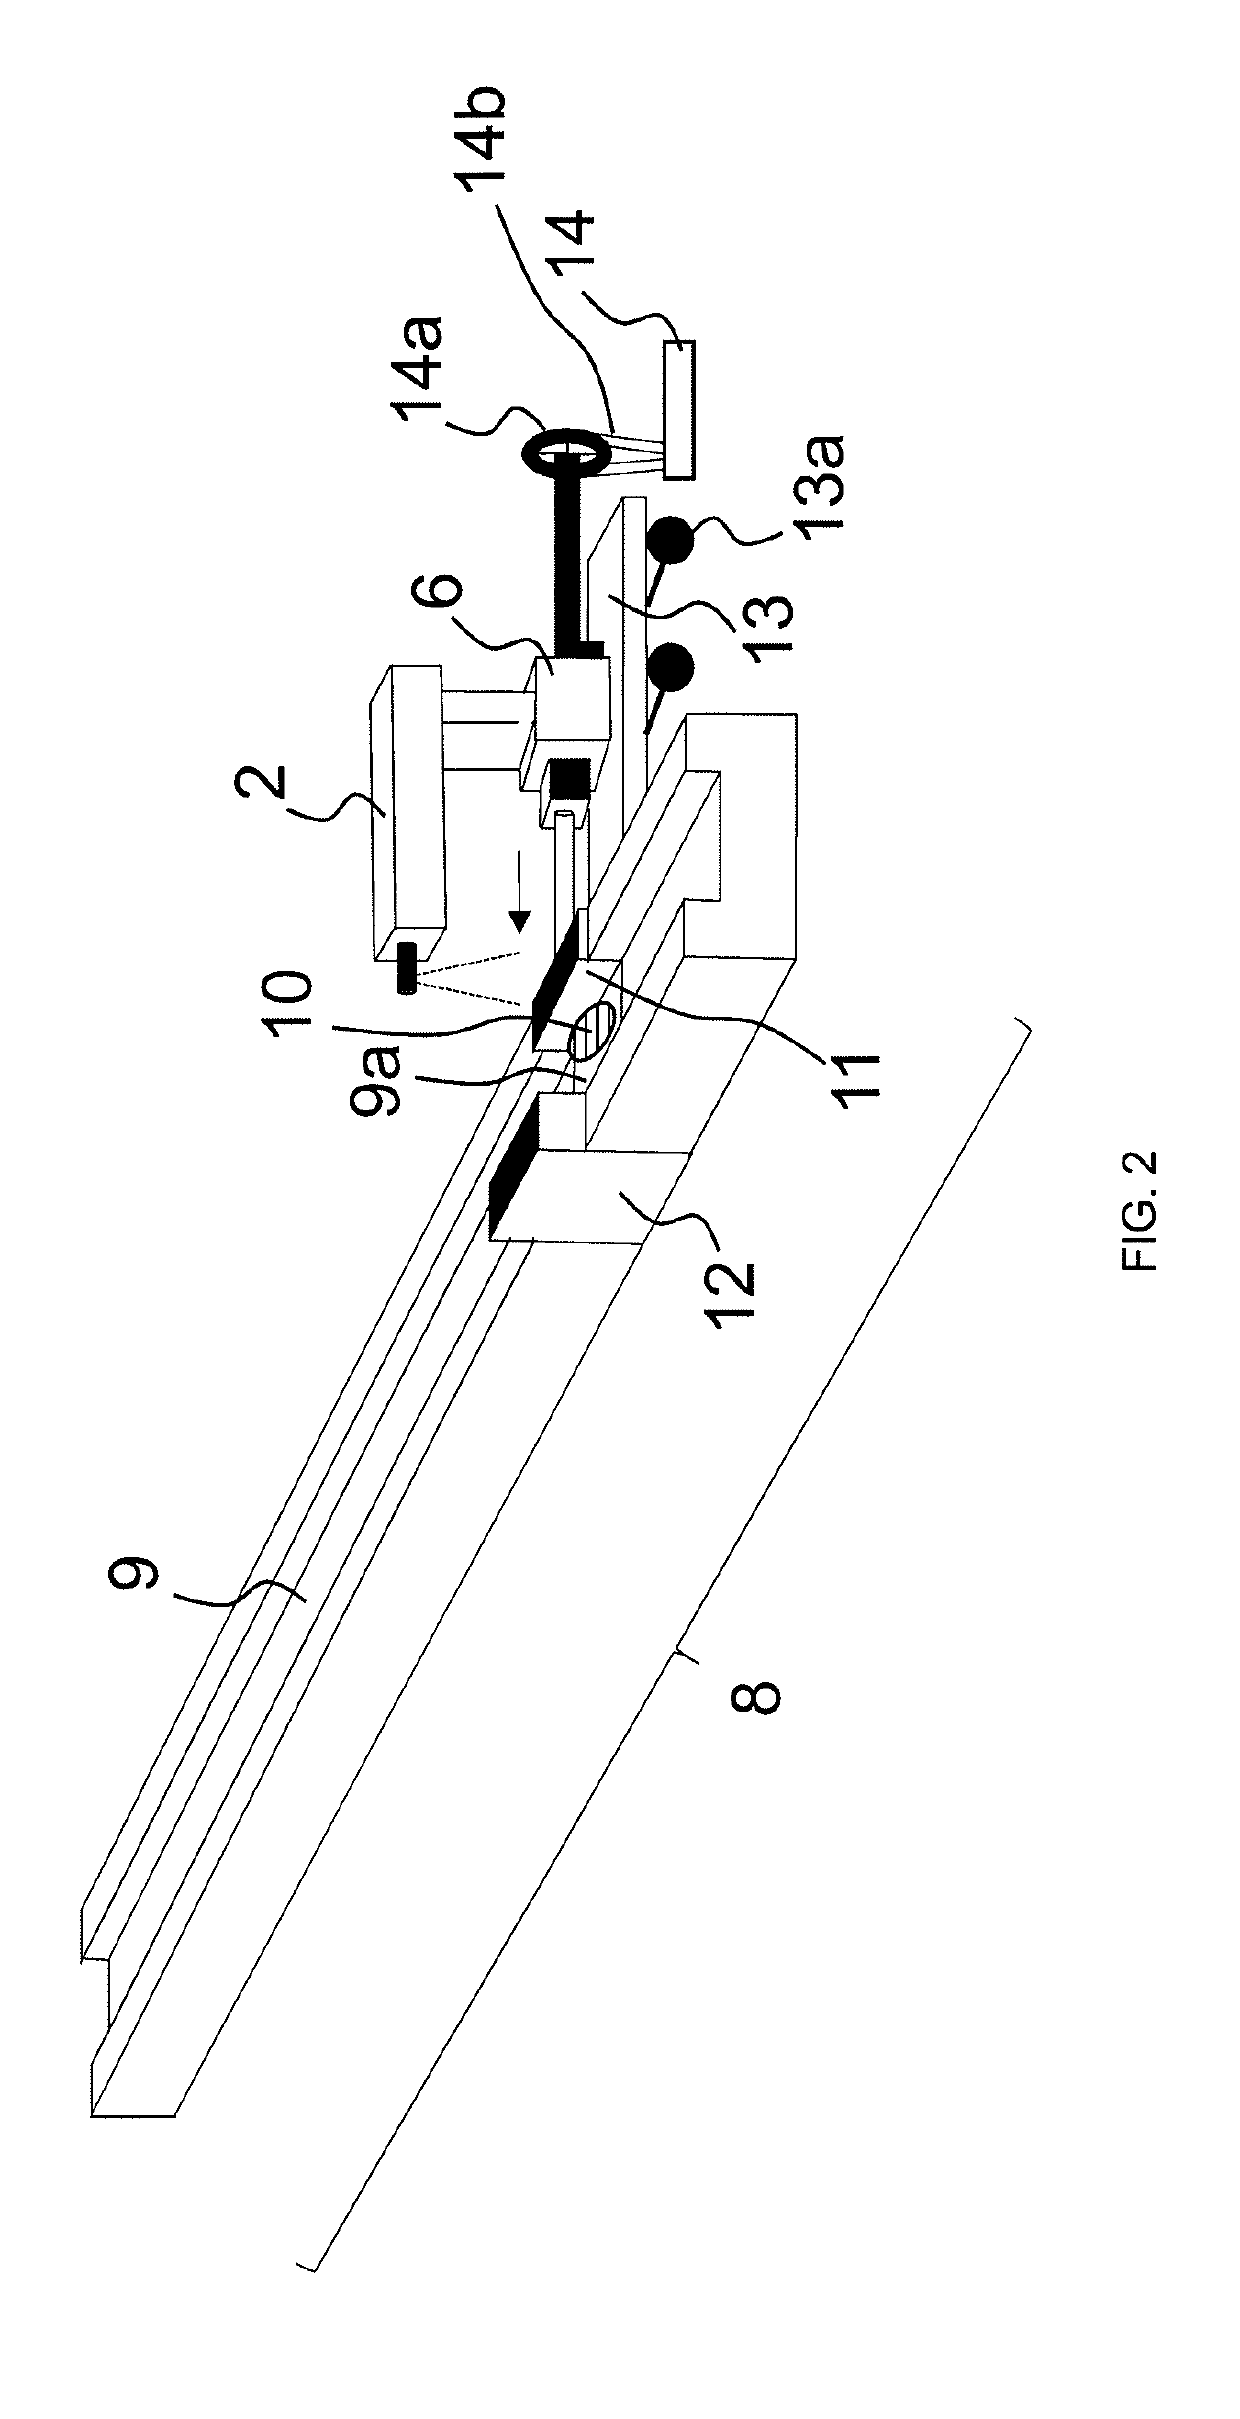 Device and method for calibration of velocity and breaking force of a table testing device